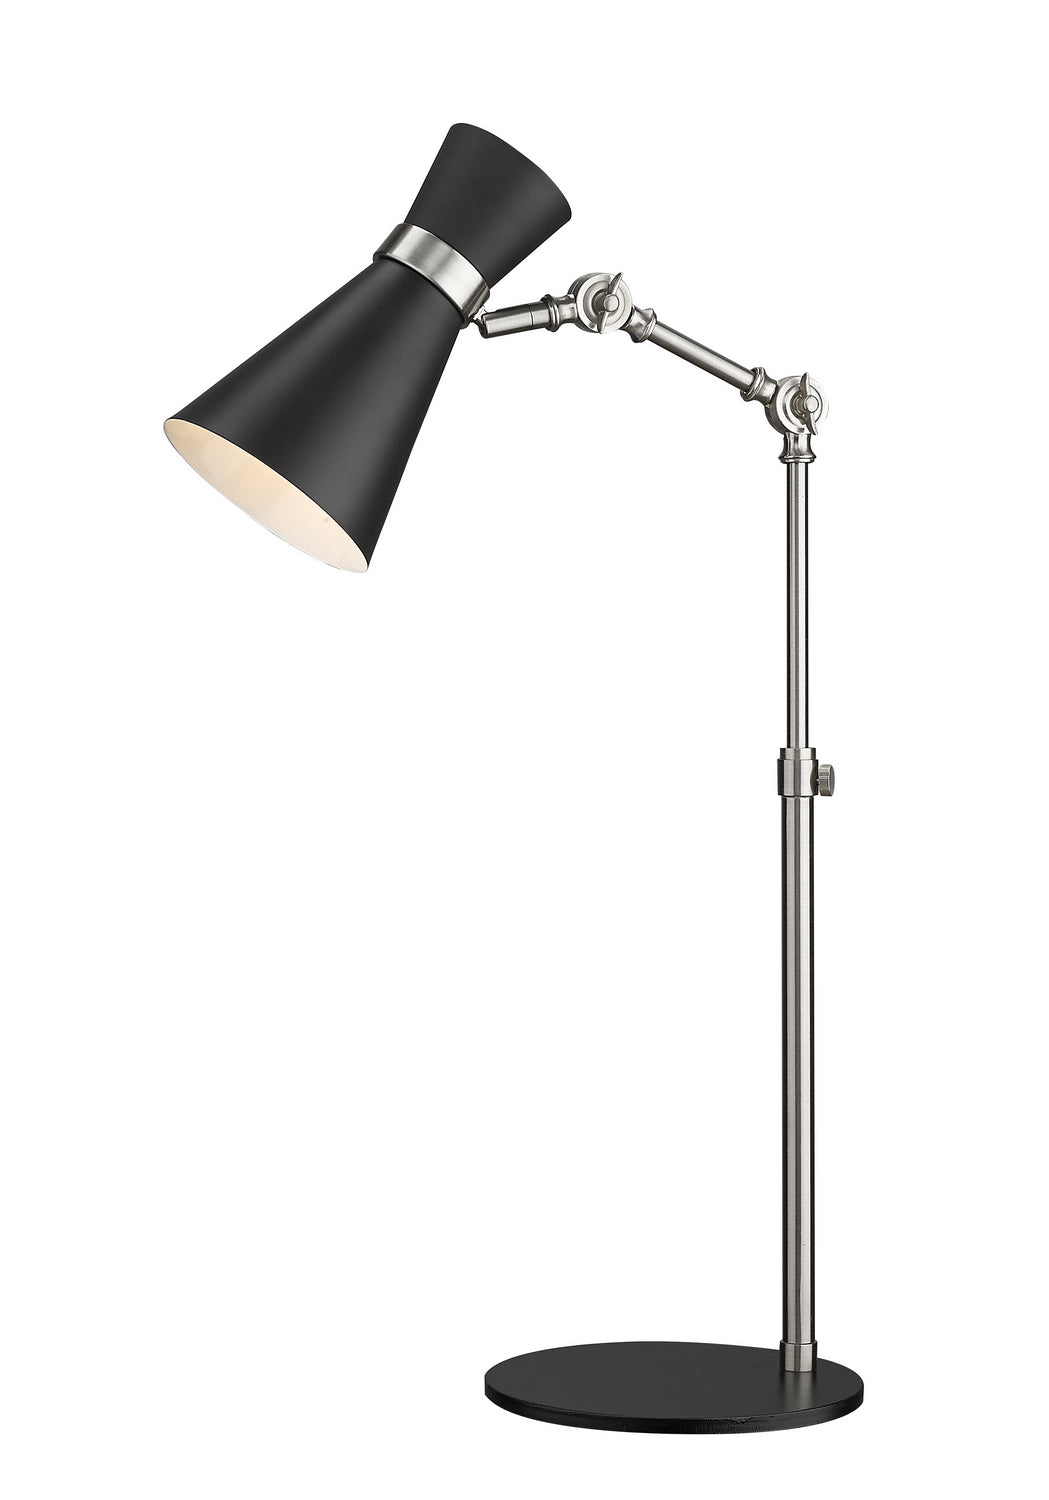 Z-Lite Canada - One Light Table Lamp - Soriano - Matte Black / Brushed Nickel- Union Lighting Luminaires Decor